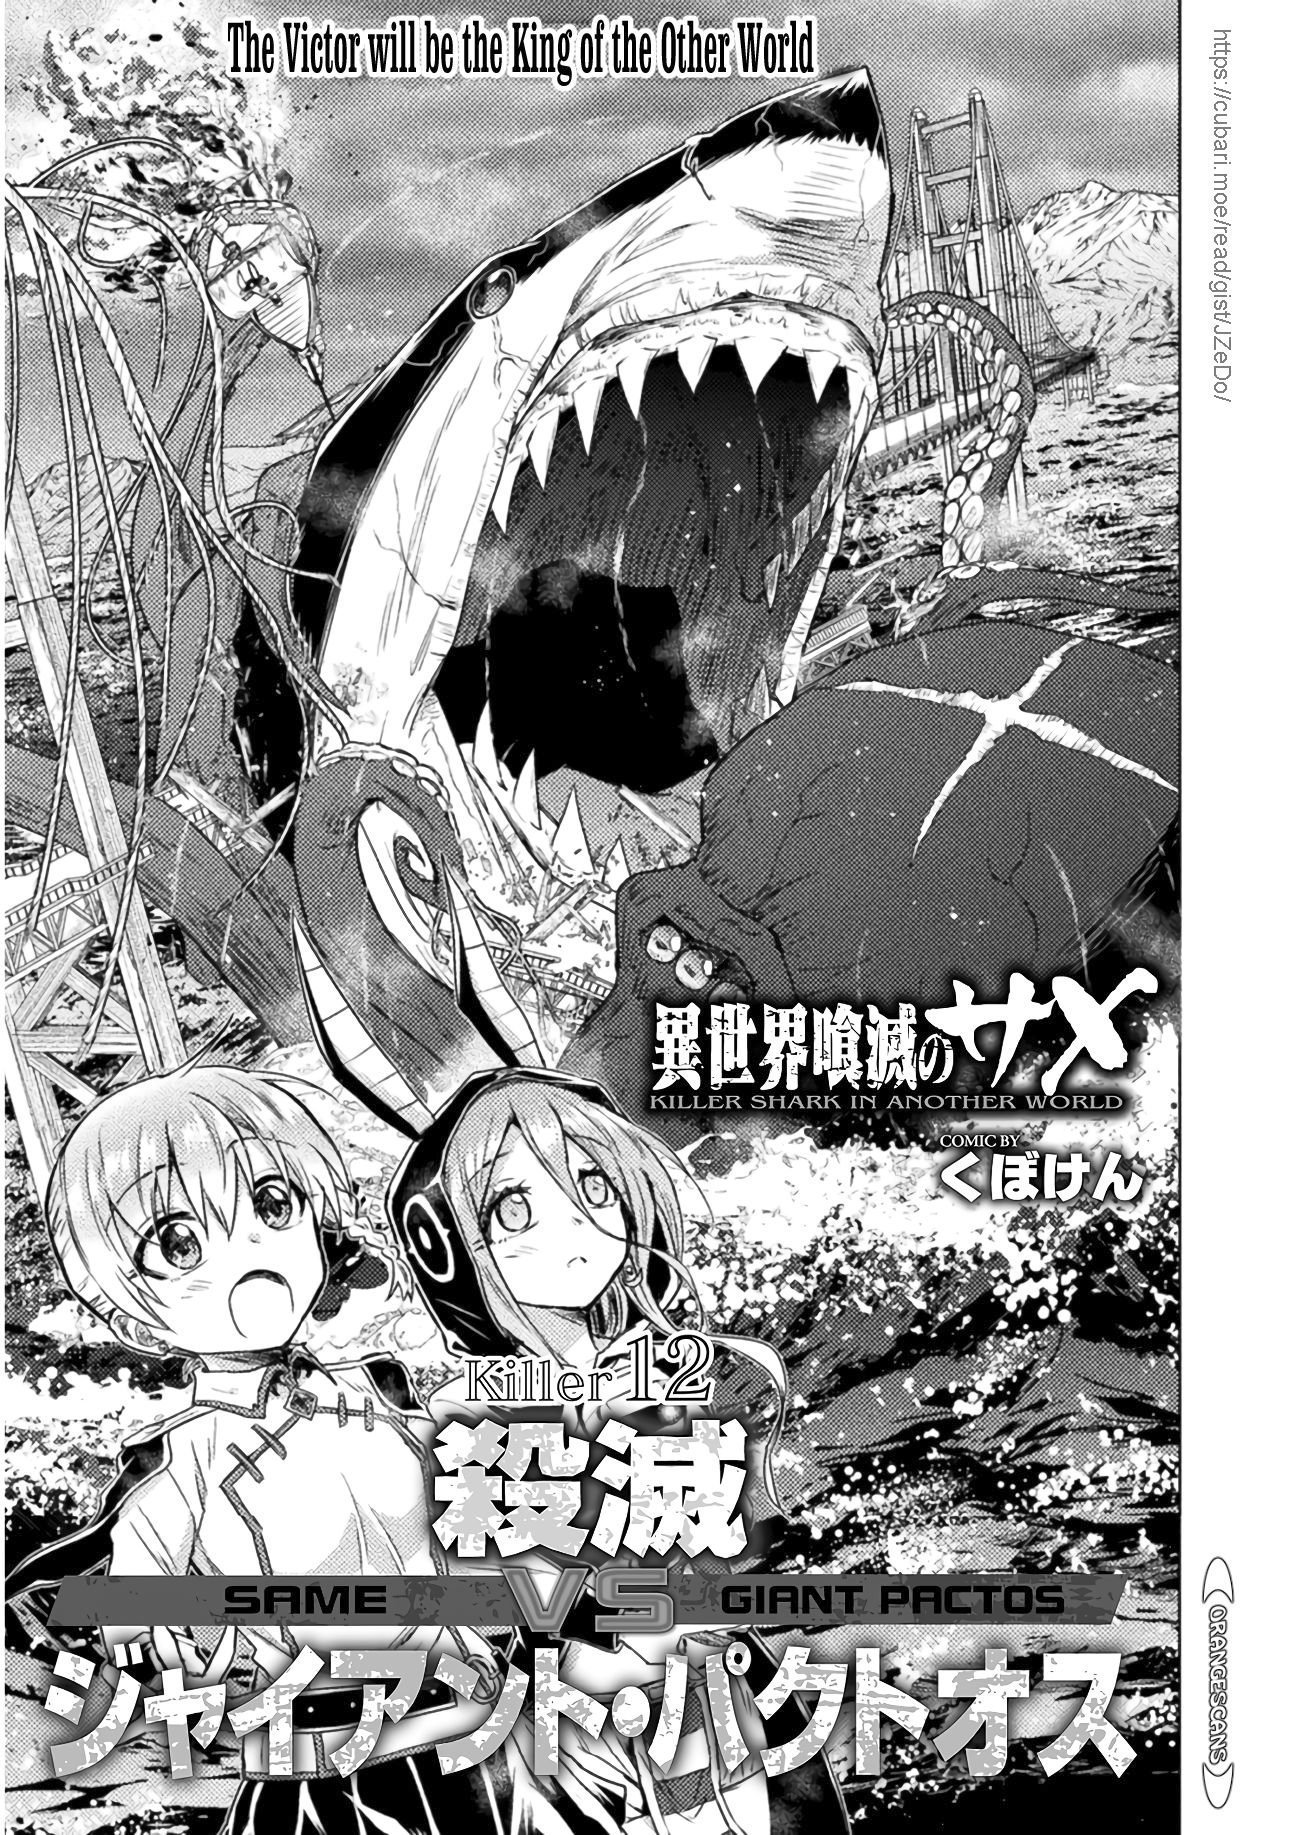 Killer Shark In Another World Chapter 12 - Picture 3